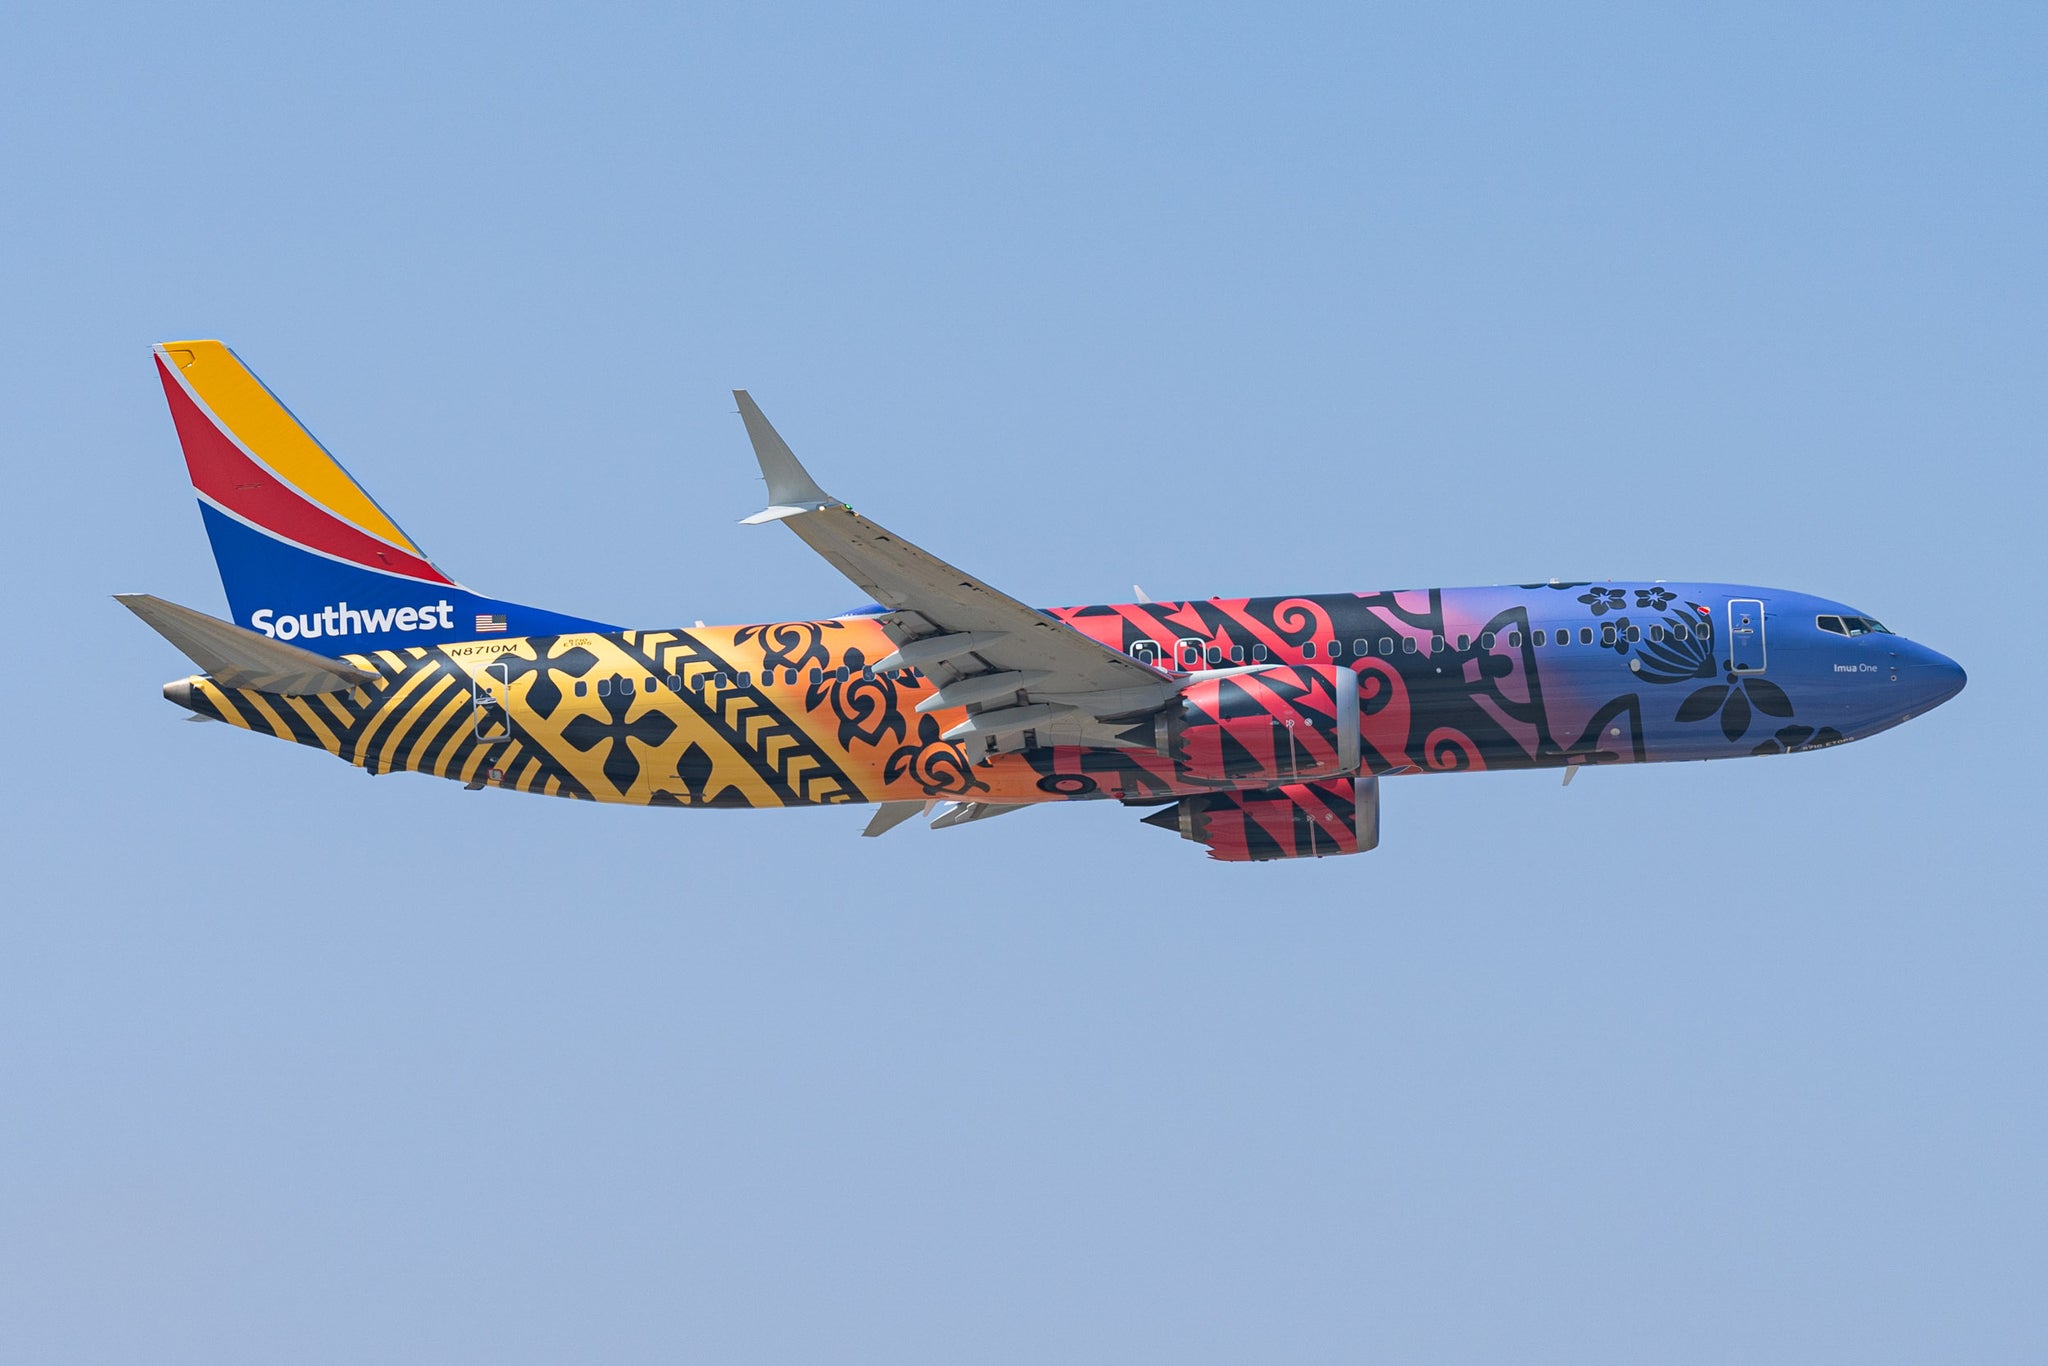 Southwest Airlines Imua One Hawaii Livery 15 ?width=2048